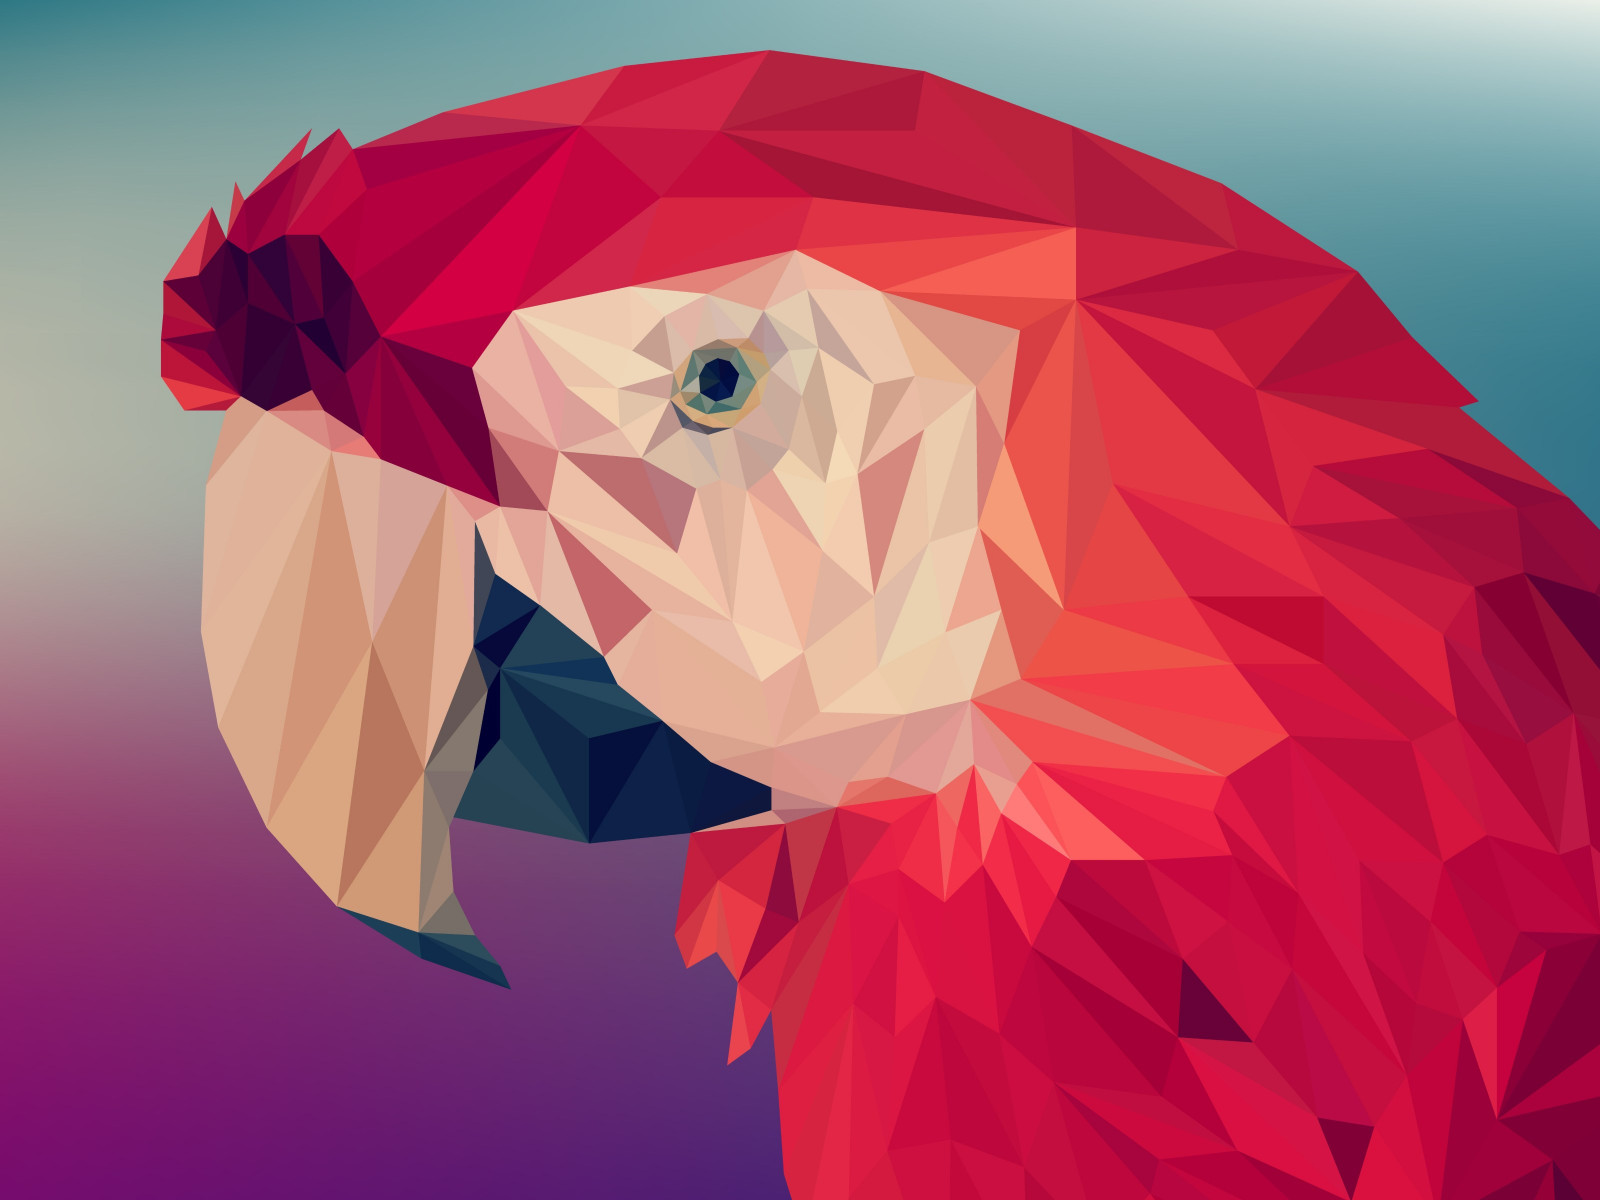 Low poly art: Red parrot wallpaper 1280x960